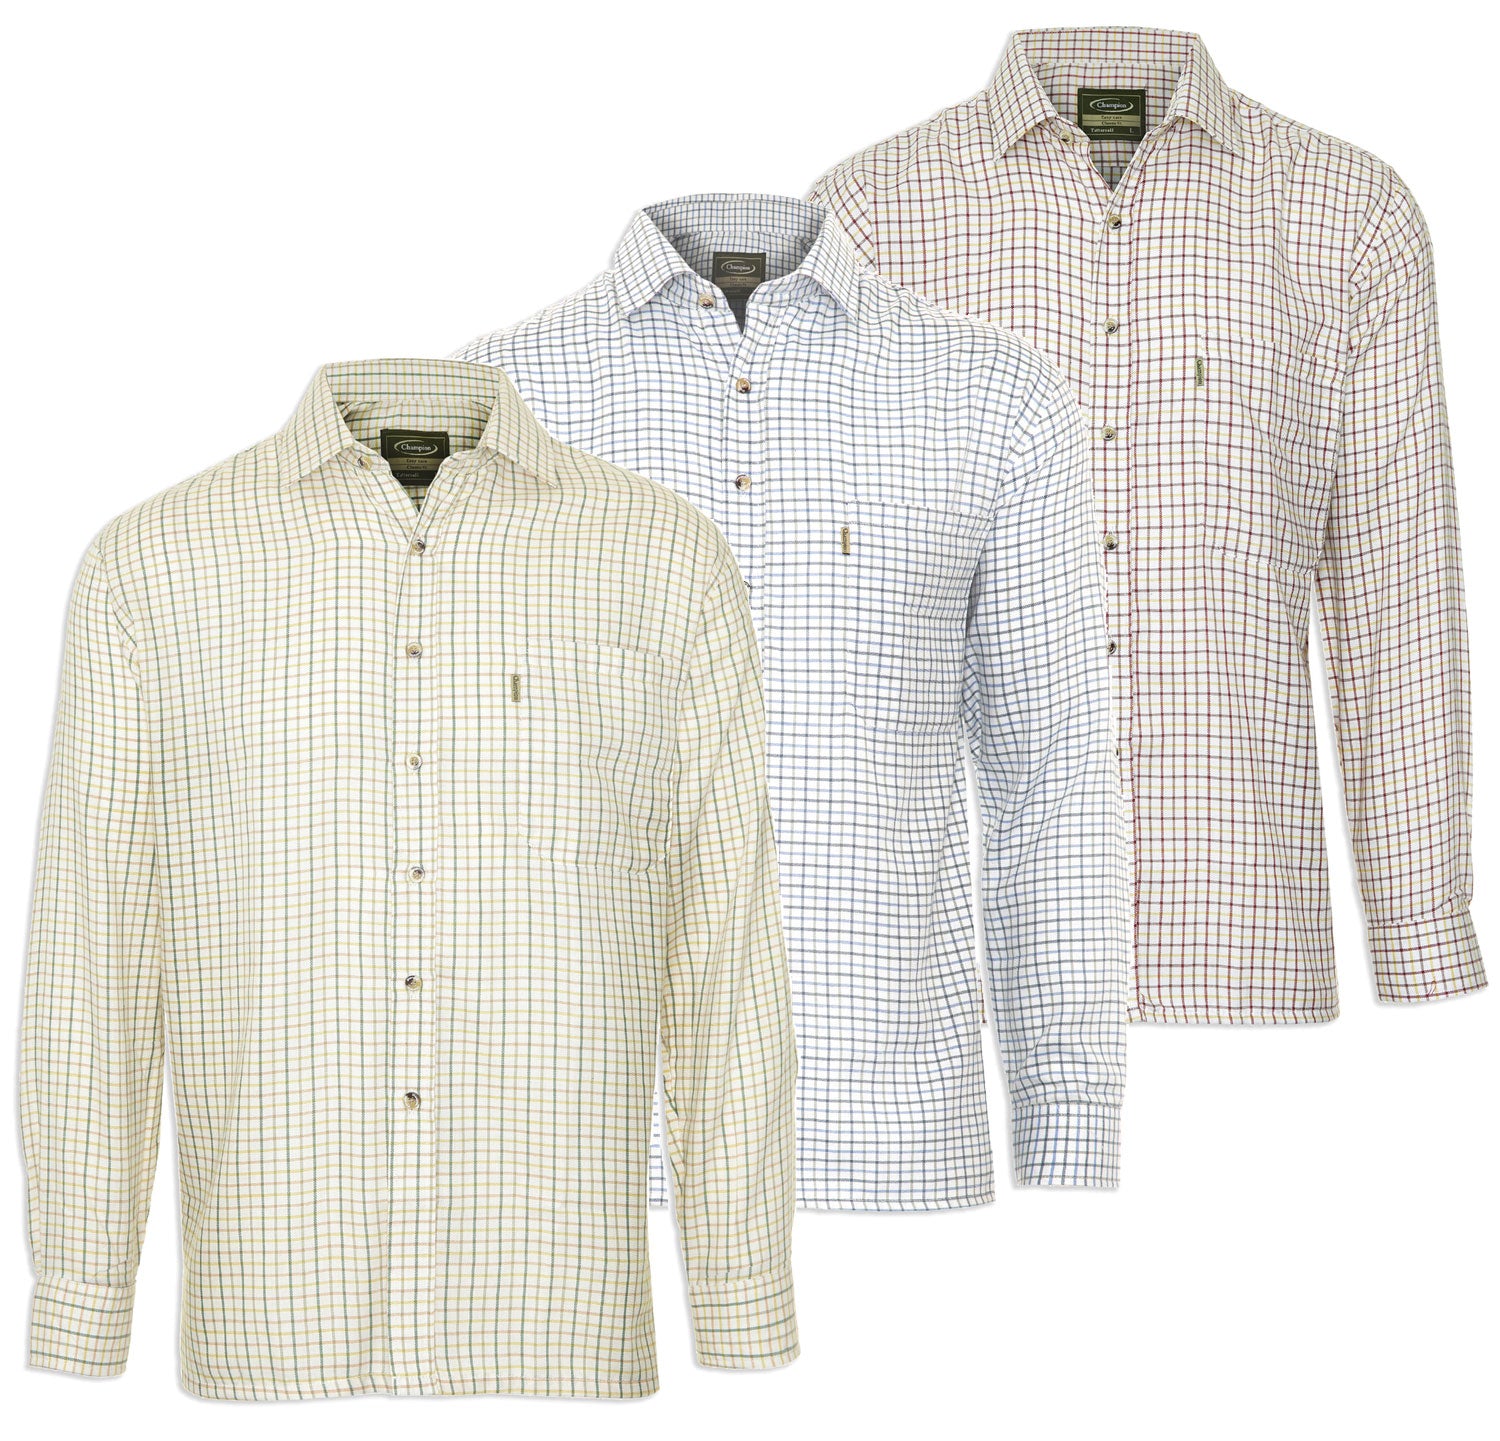 Champion Tattersall Check Shirt in Green/Brown, Blue and Red 